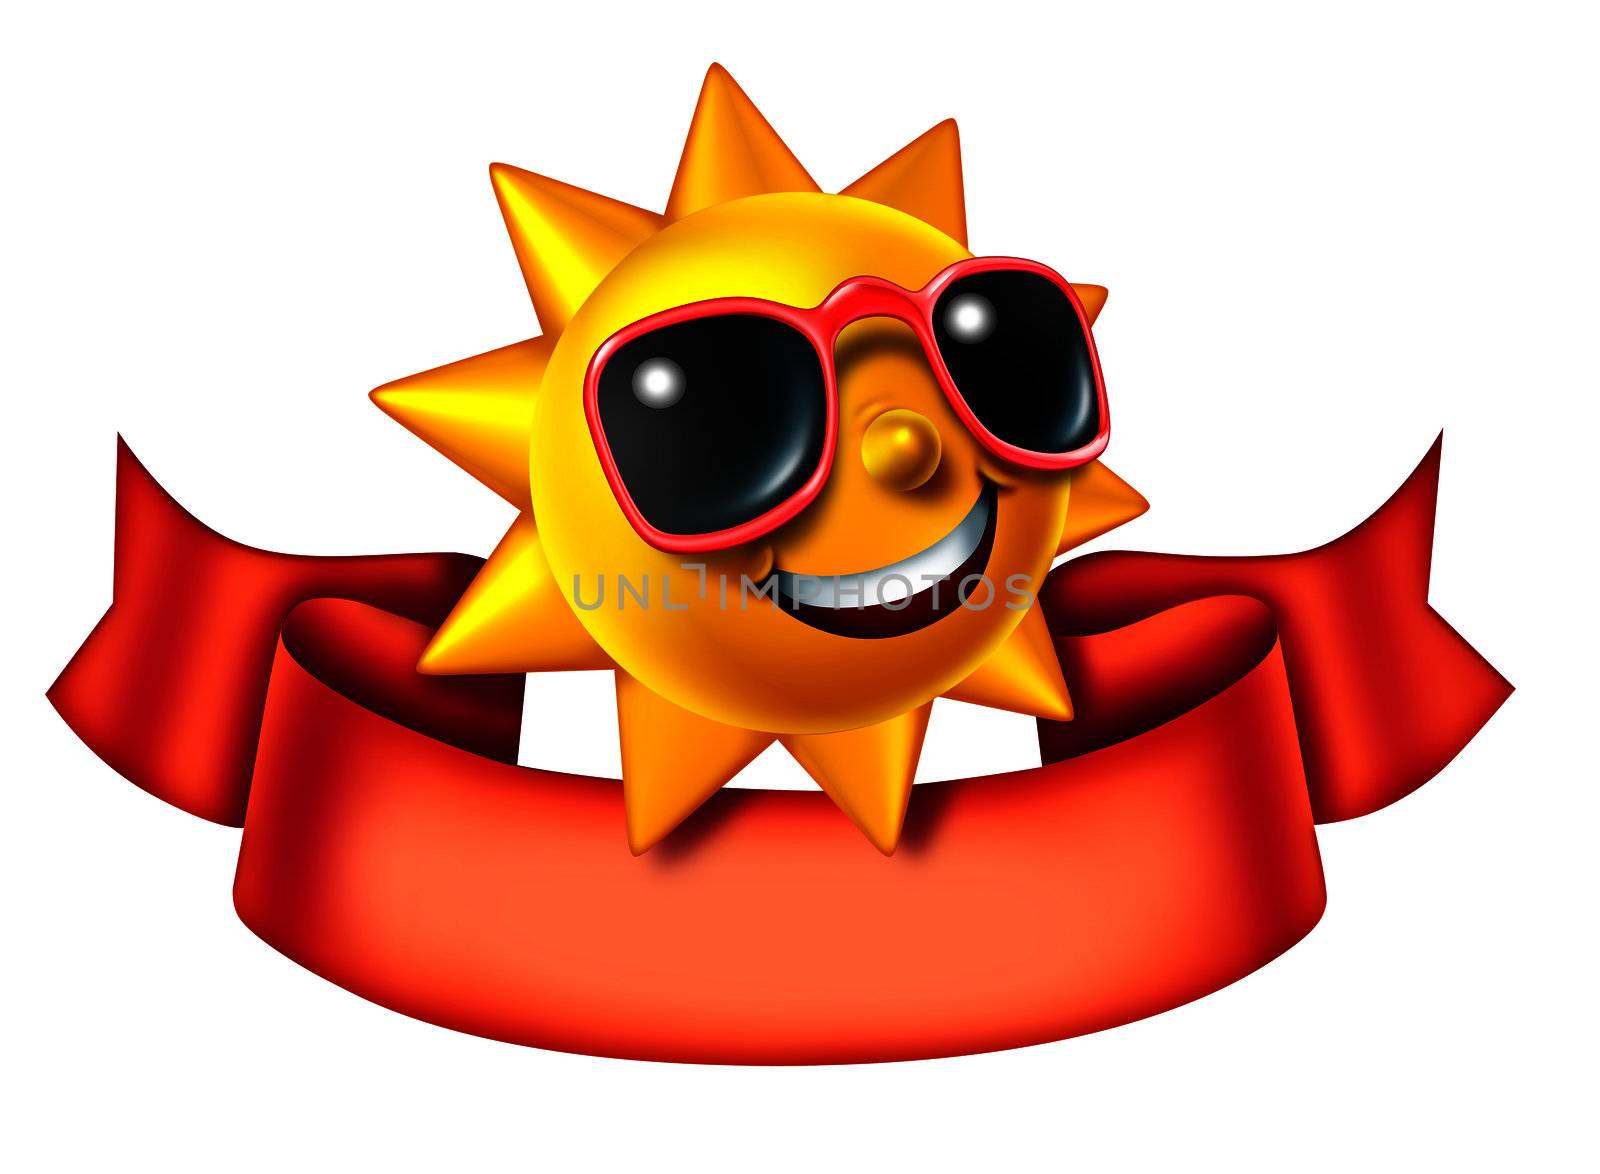 Sunny sun three dimensional cartoon character with a blank red banner as a hot summer symbol of heat and vacation advertisement or communication icon and relaxation isolated on a white background.